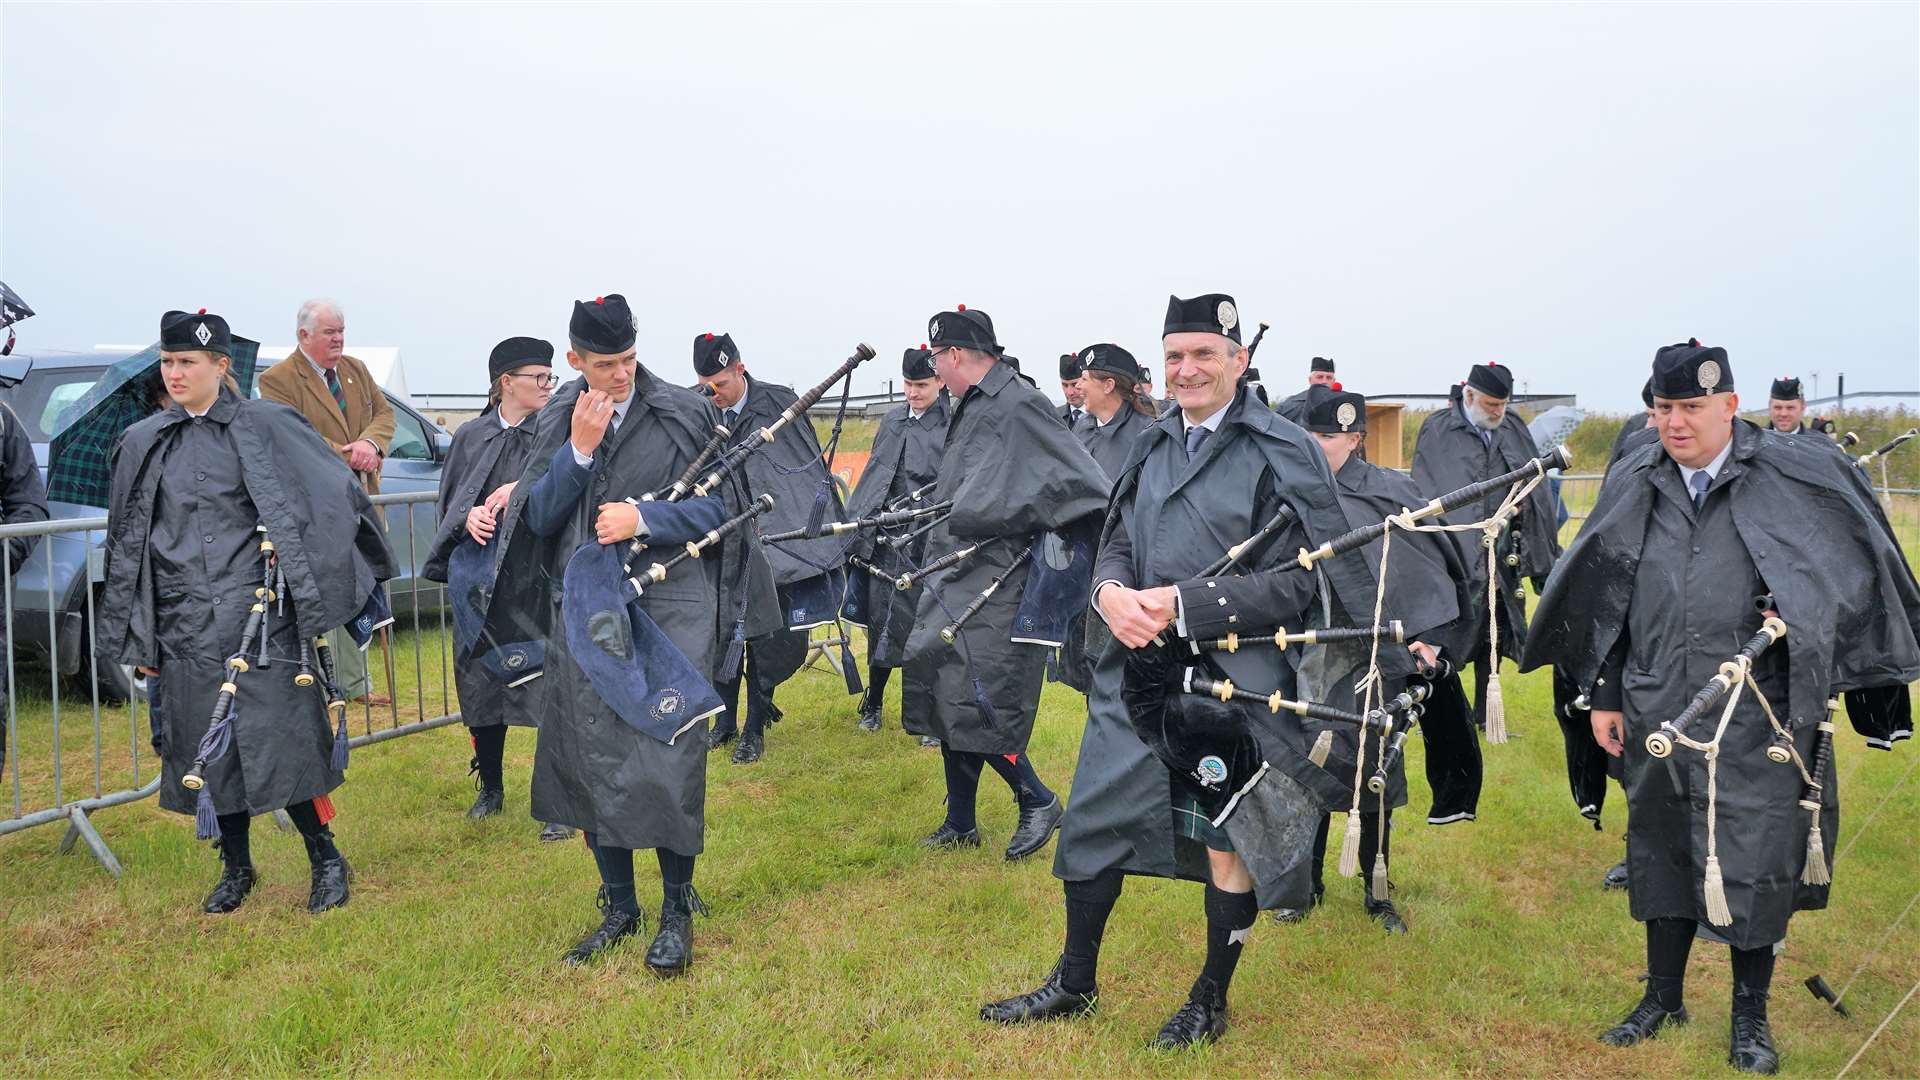 Pipe bands from Wick and Thurso provided entertainment. Picture: DGS